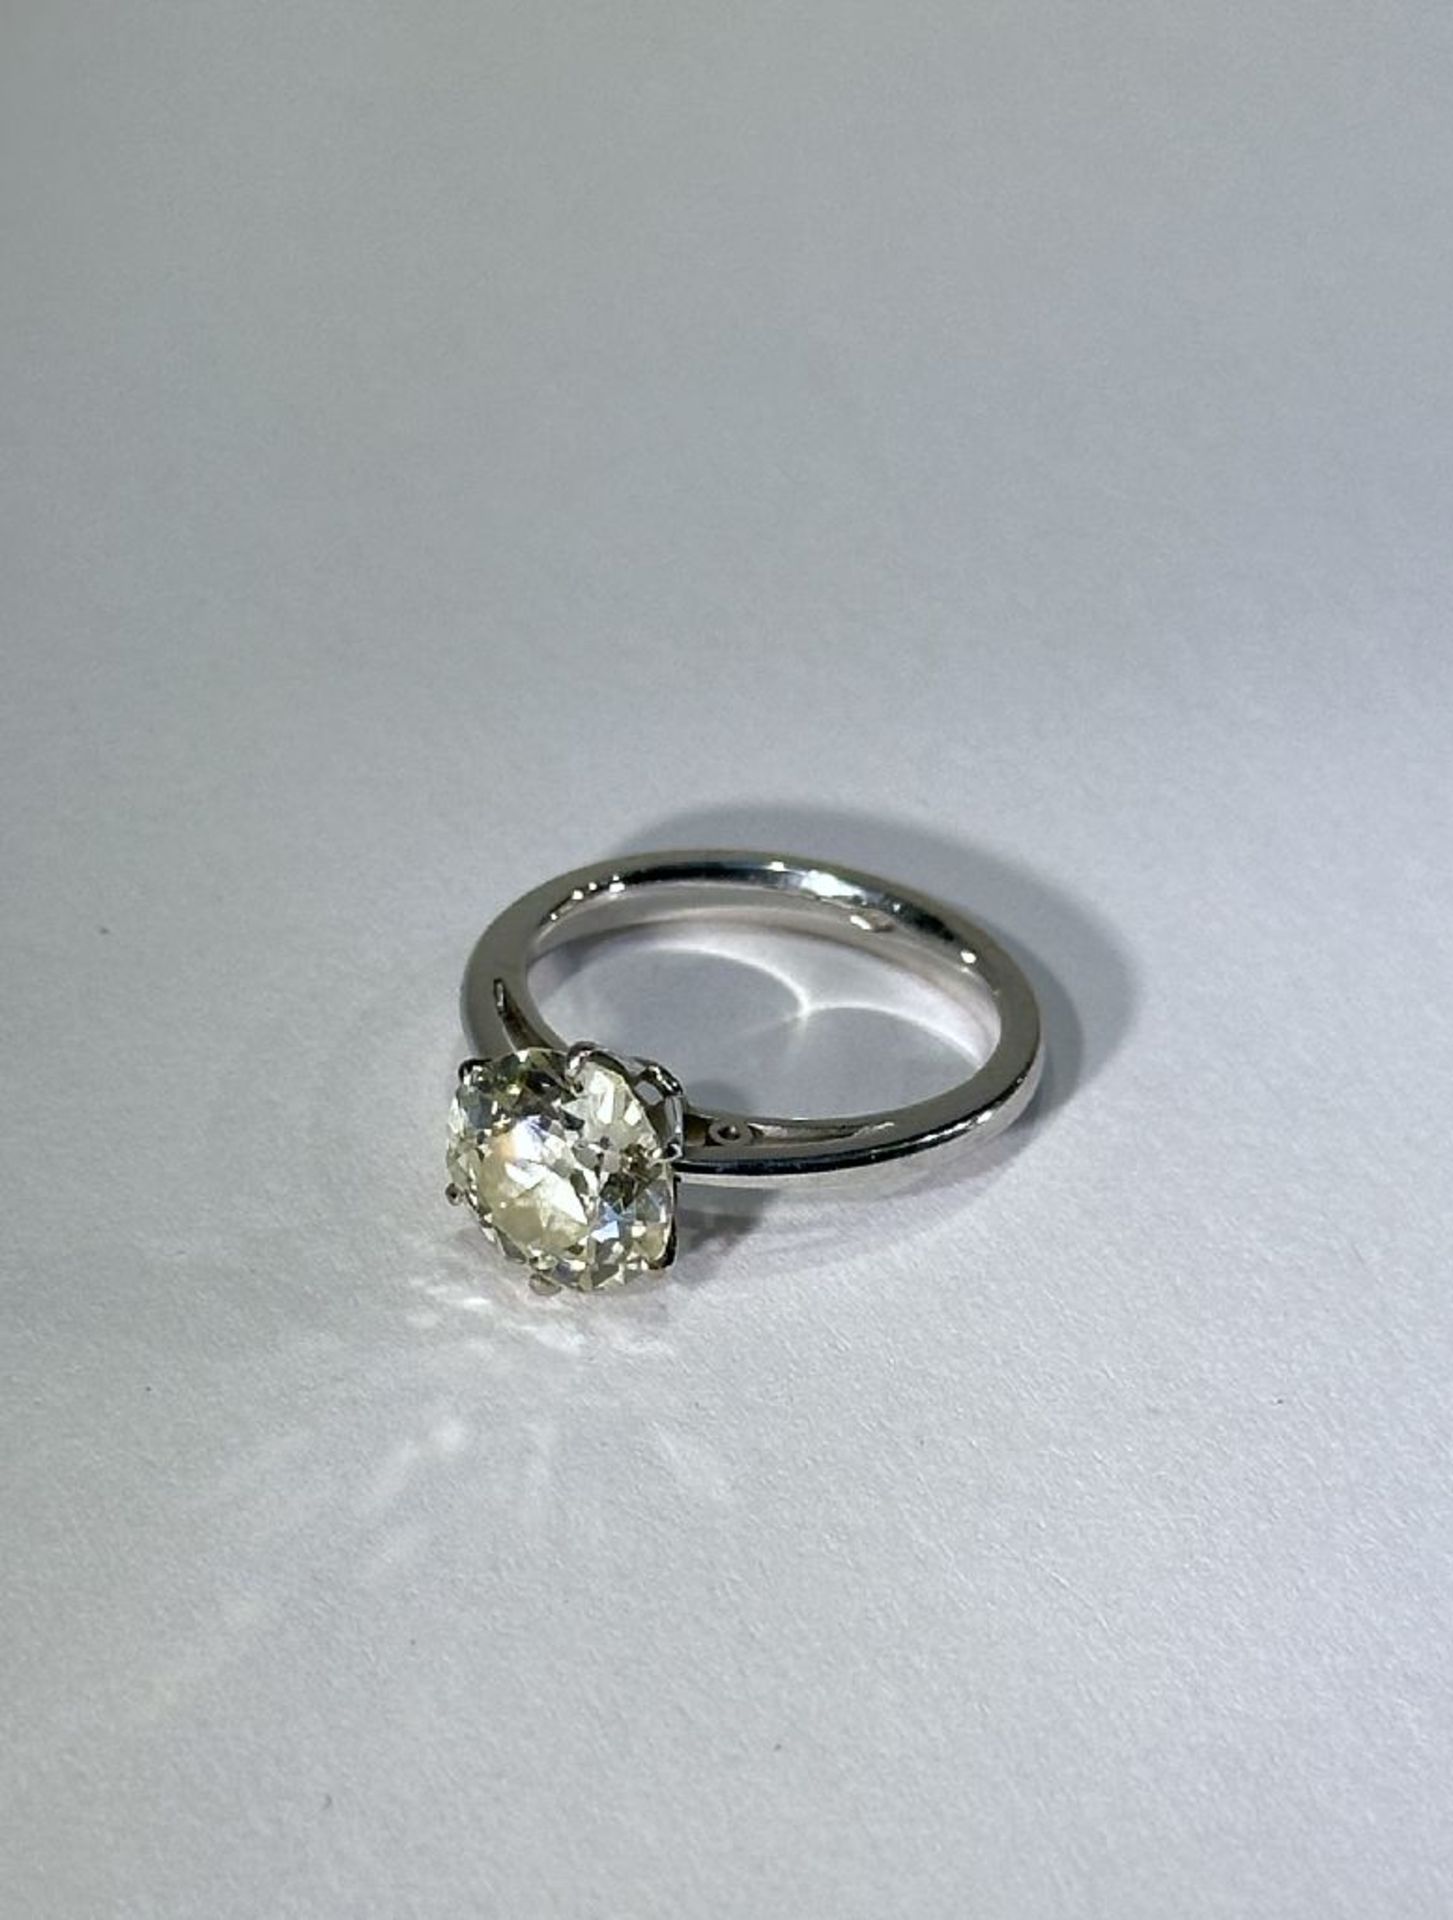 Ring in white gold (new frame) with diamond of approximately 2.5ct (old cut) - Image 6 of 8